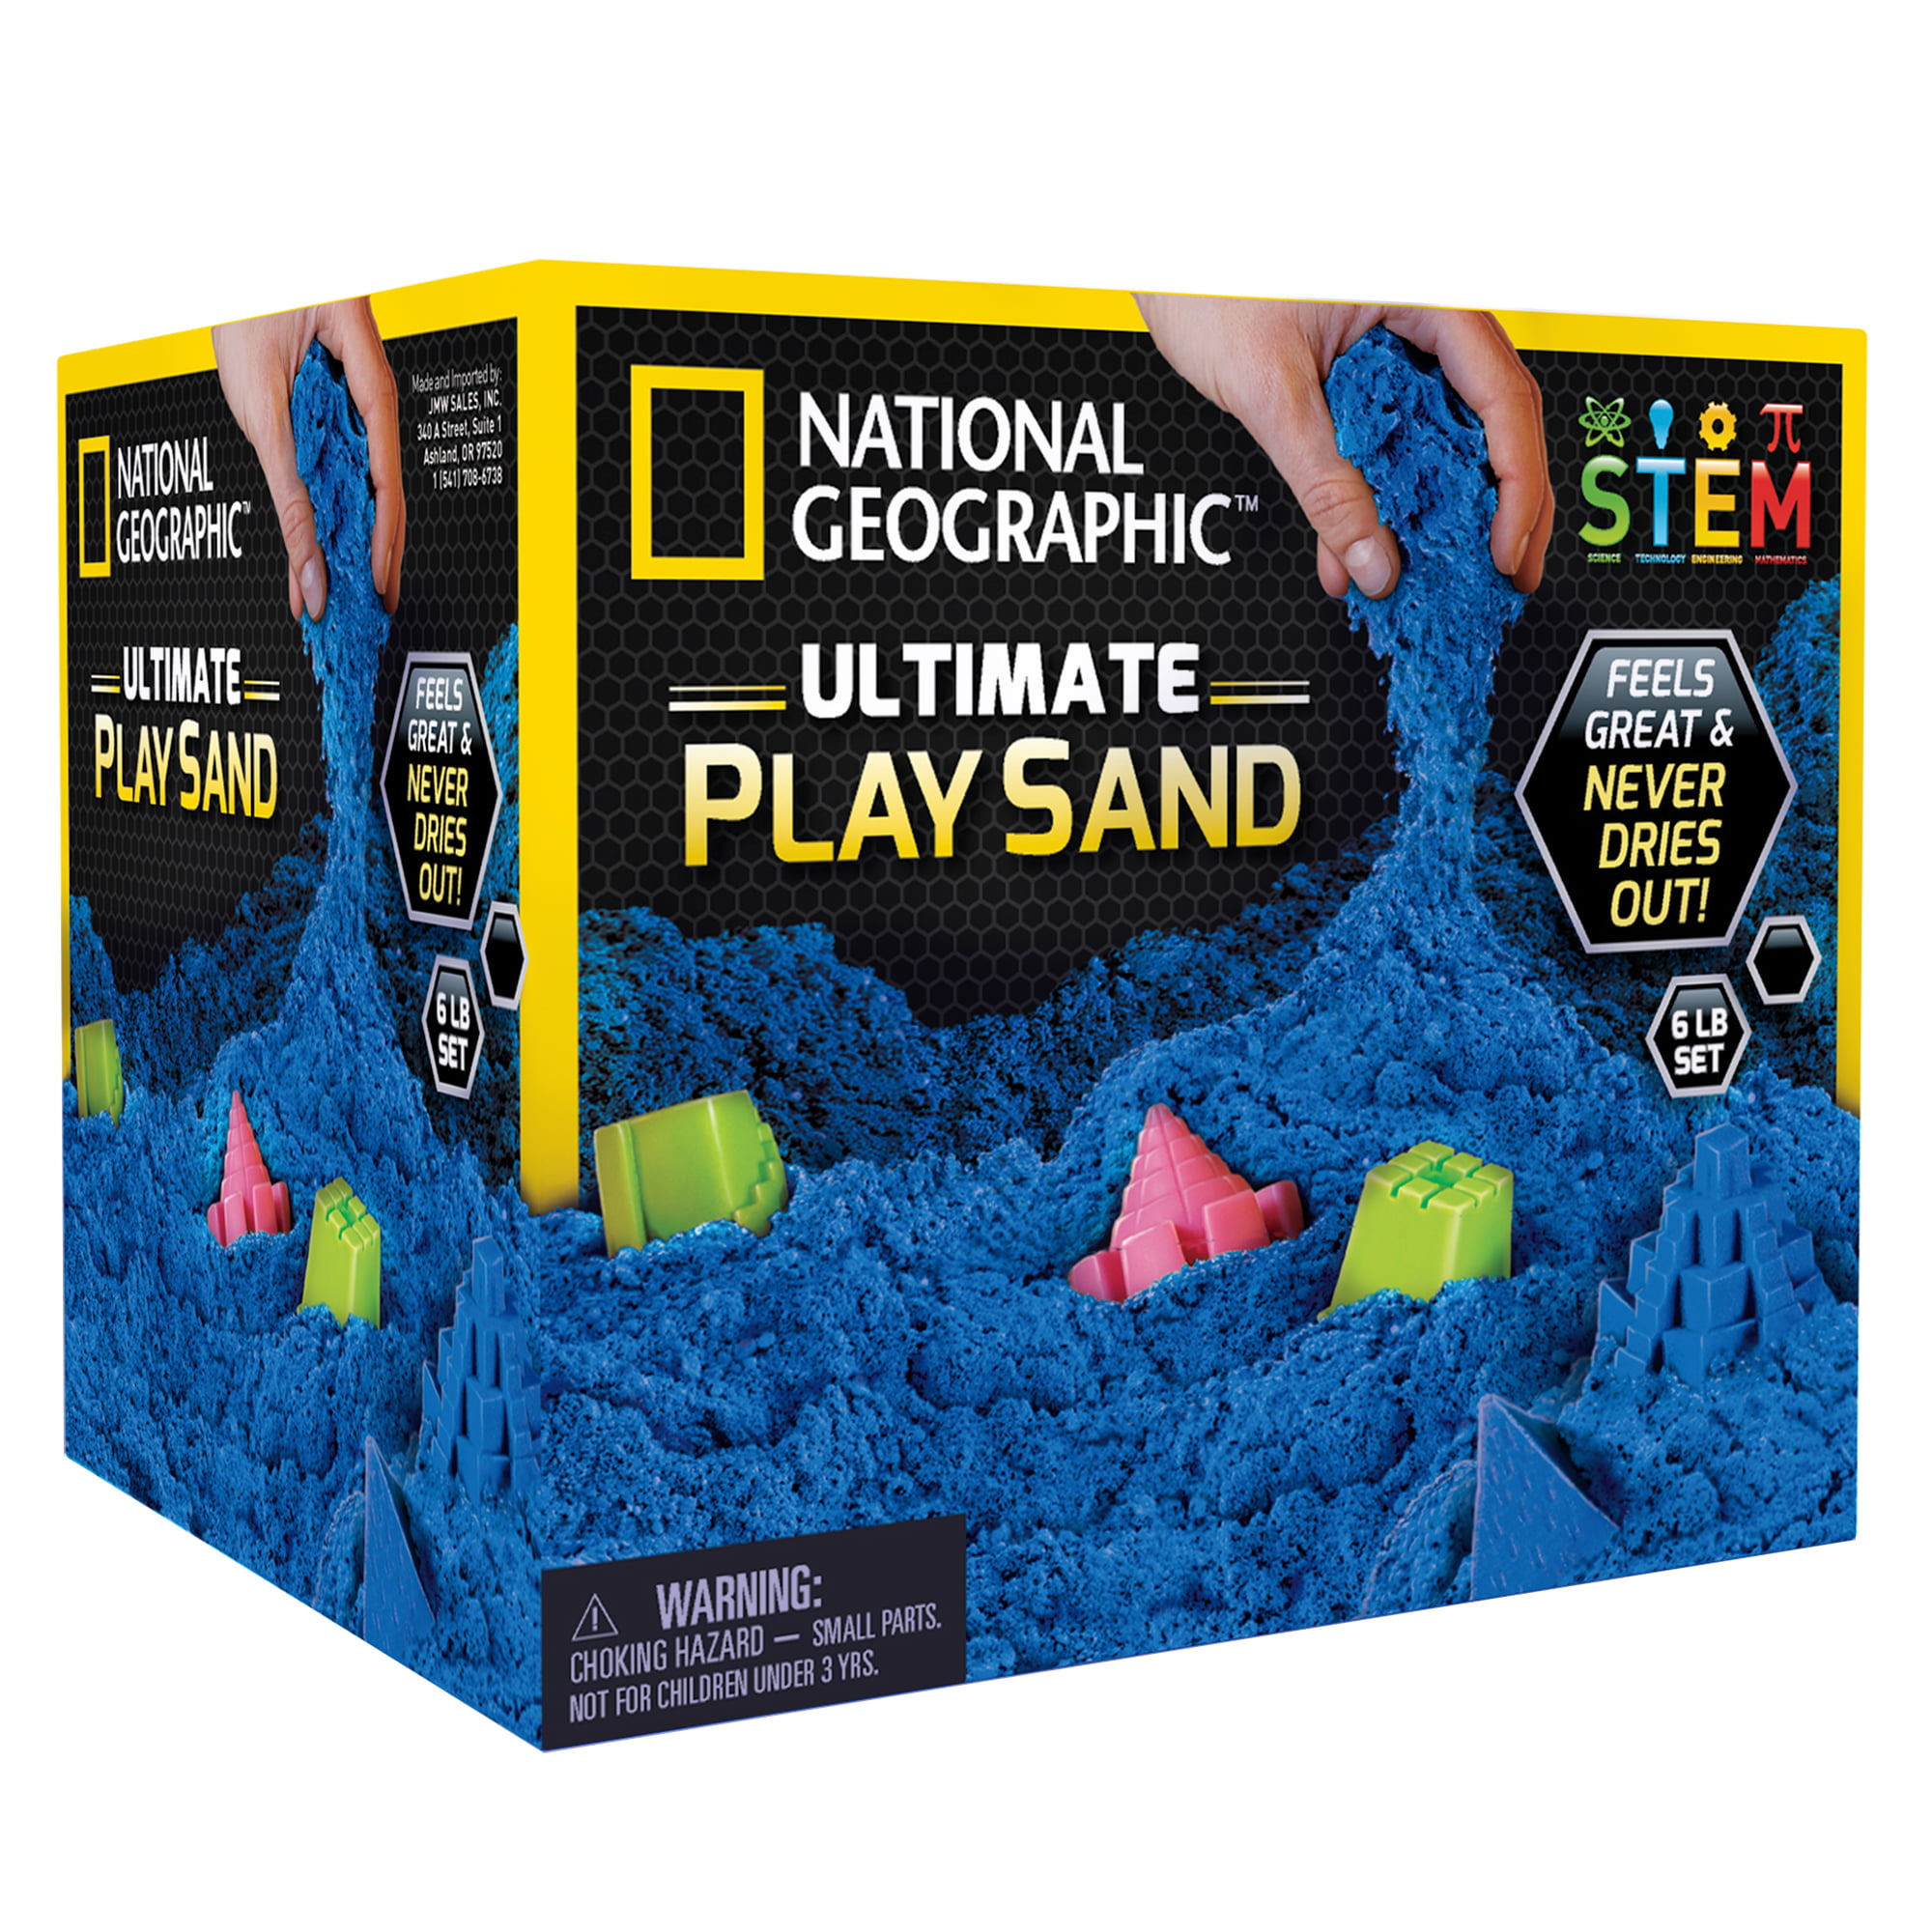 NATIONAL GEOGRAPHIC Play Sand Purple 6 LBS of Sand with Castle Molds - A Kinetic Sensory Activity 